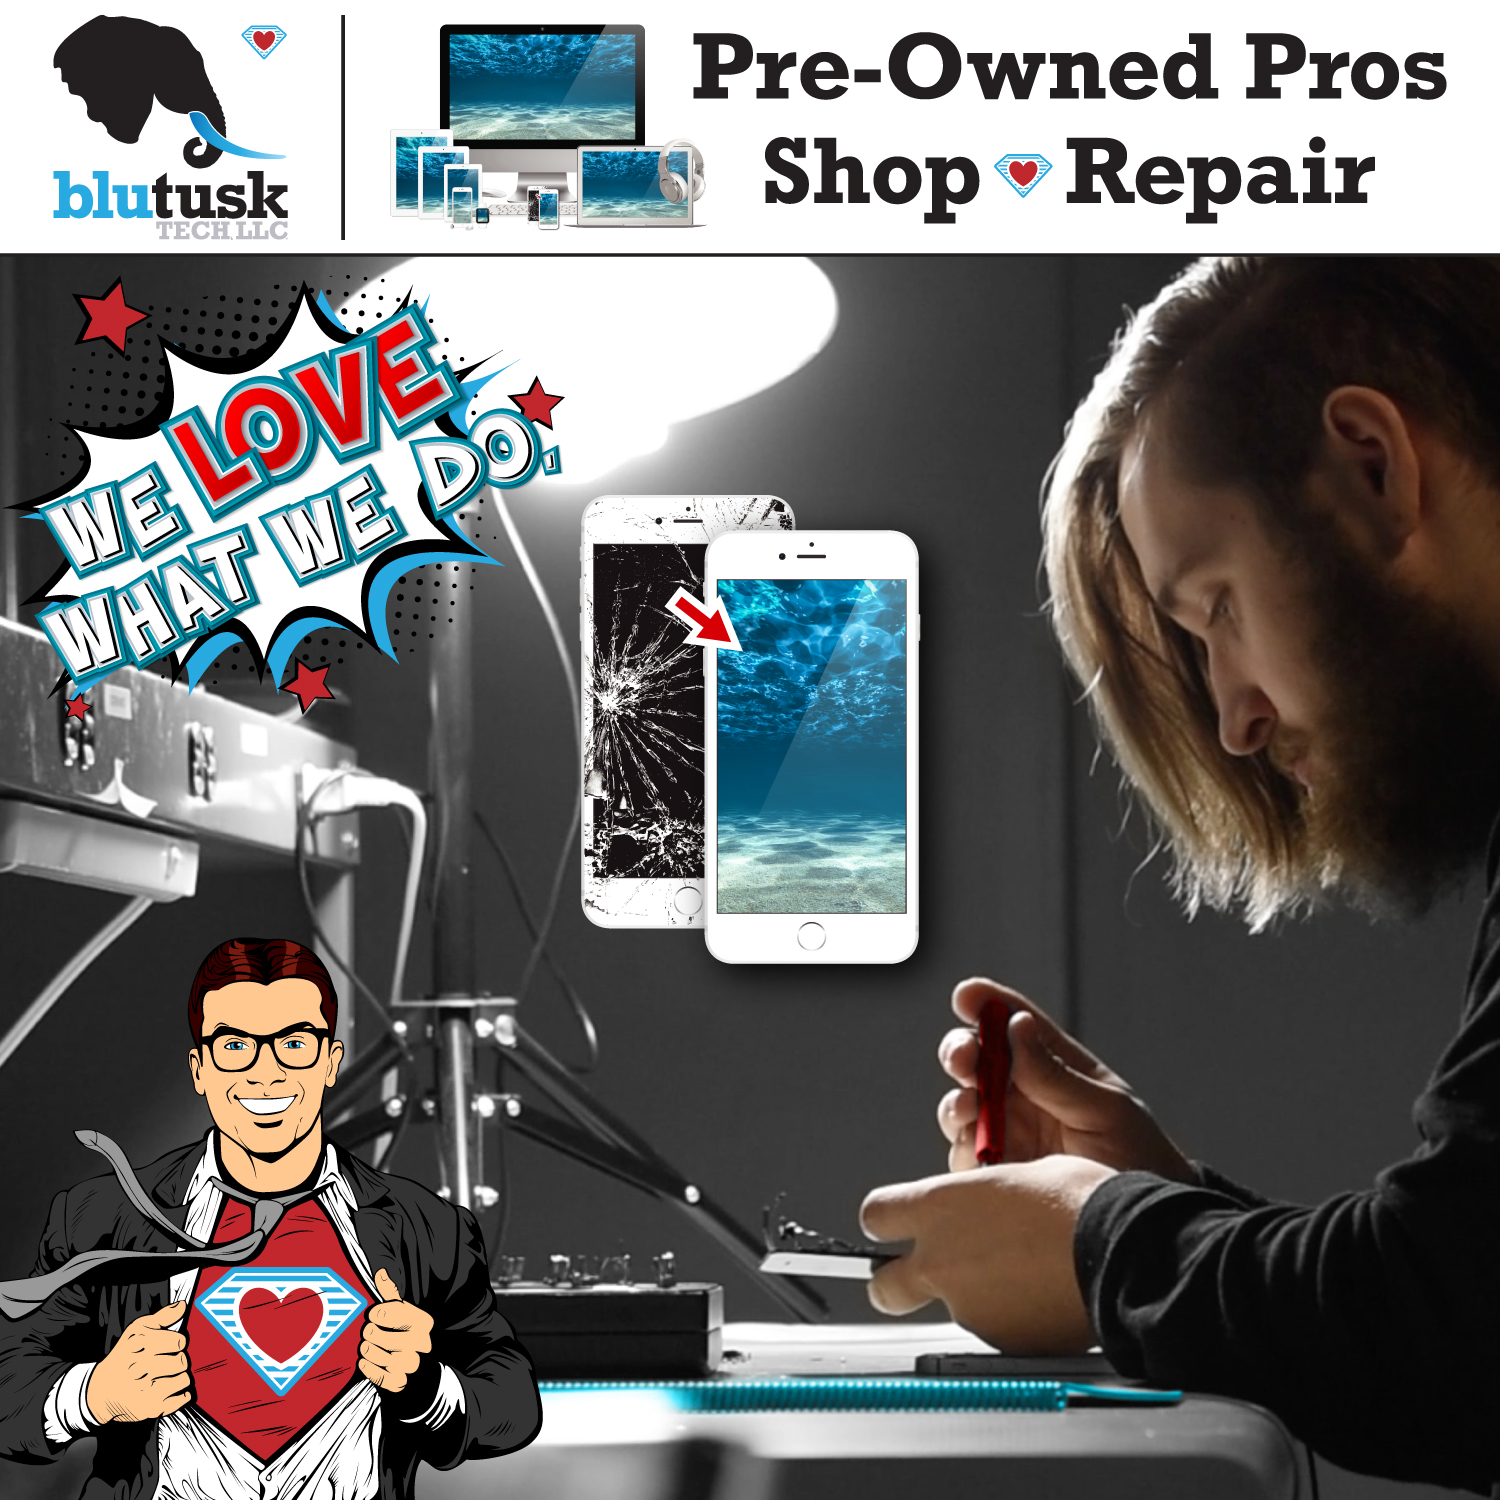 Number 10, Repair Pros, from the top 10 reasons to shop with The Pre-Owned Pros at Blutusk Tech, LLC 